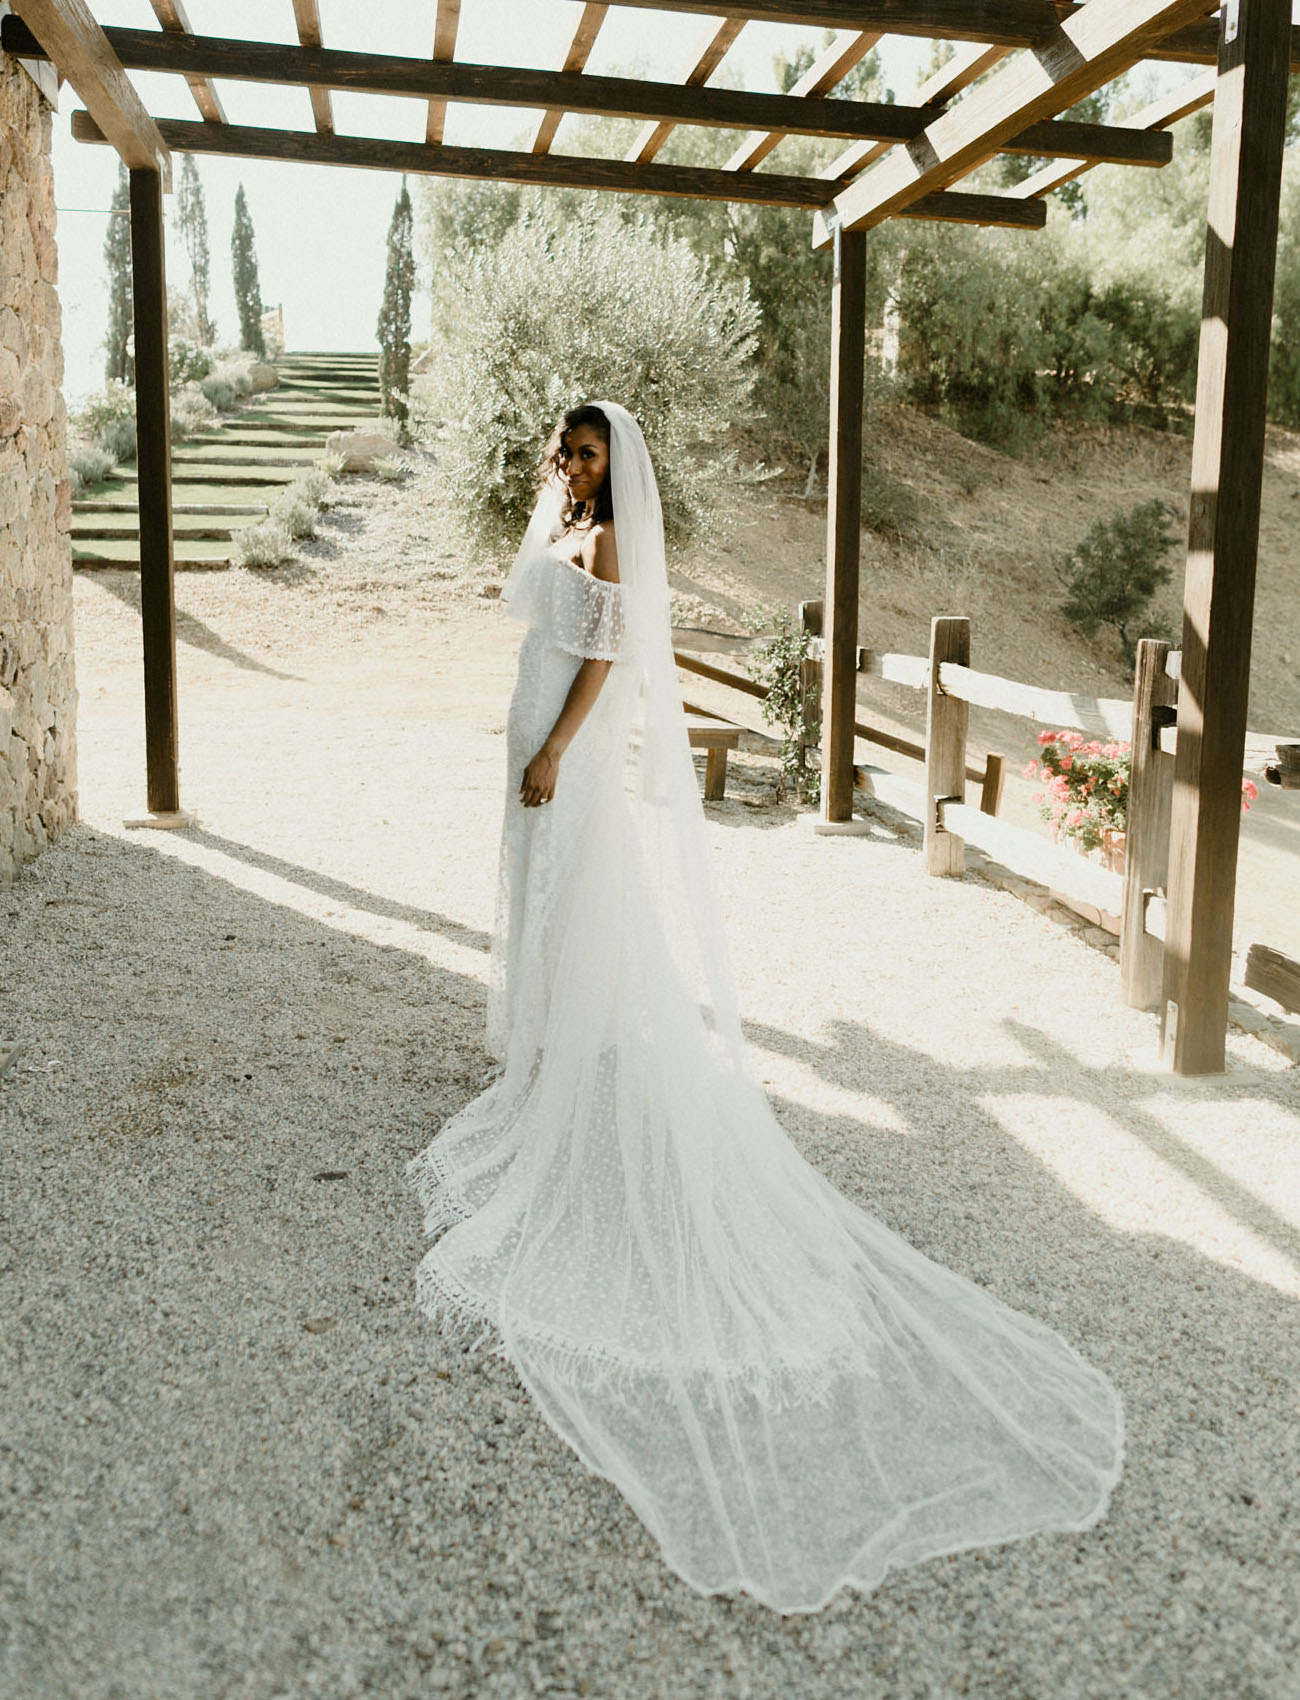 The bride was wearing a stunning off the shoulder polka dot wedding dress and a matching veil